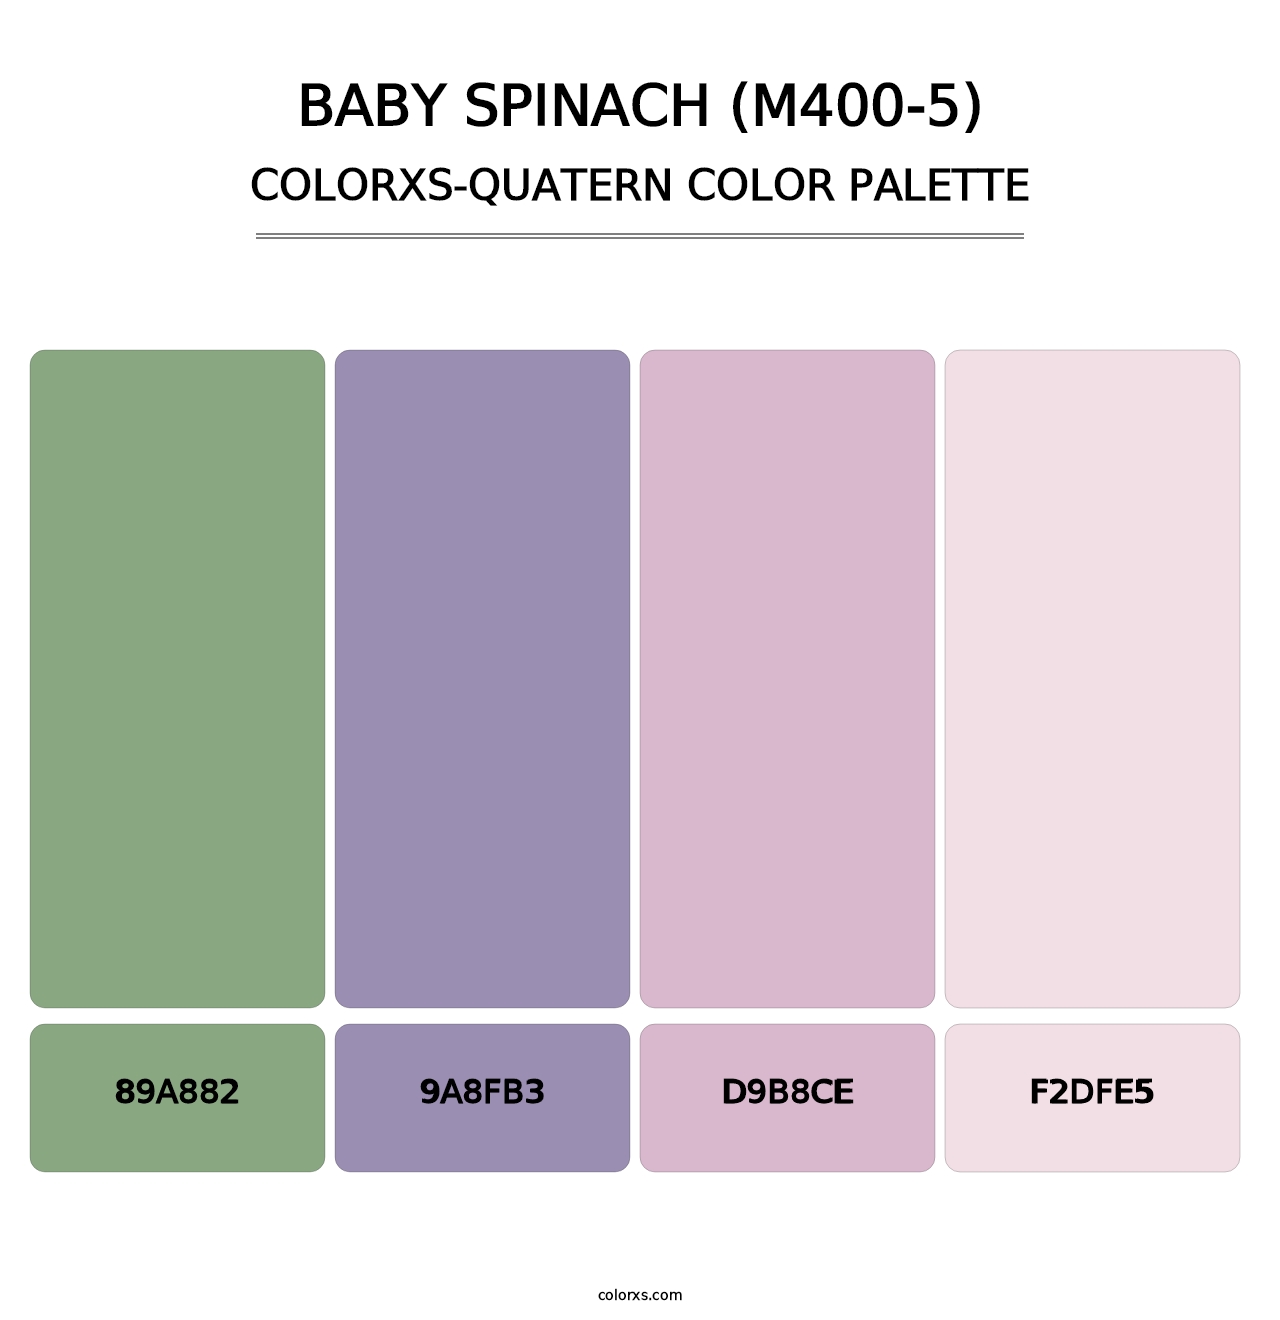 Baby Spinach (M400-5) - Colorxs Quatern Palette